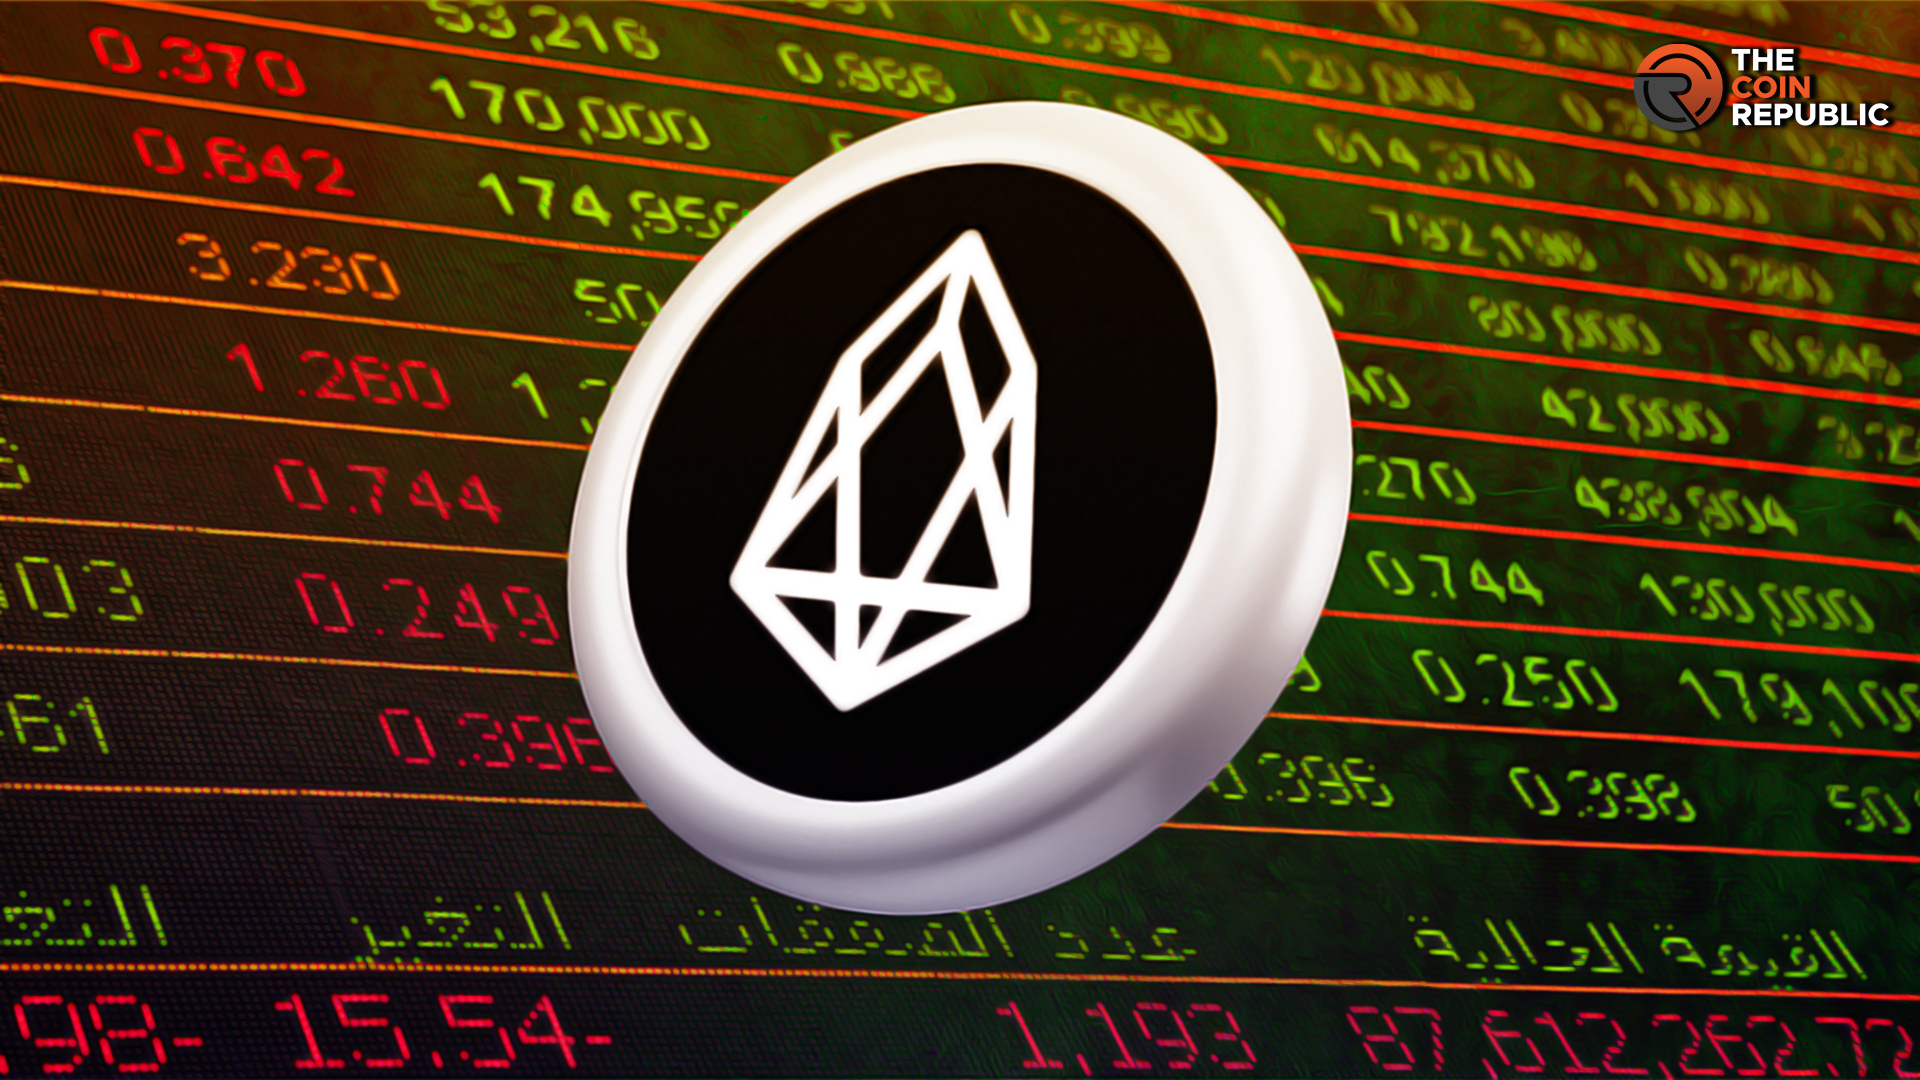 EOS Price Prediction: Will EOS Break the Consolidation Phase?